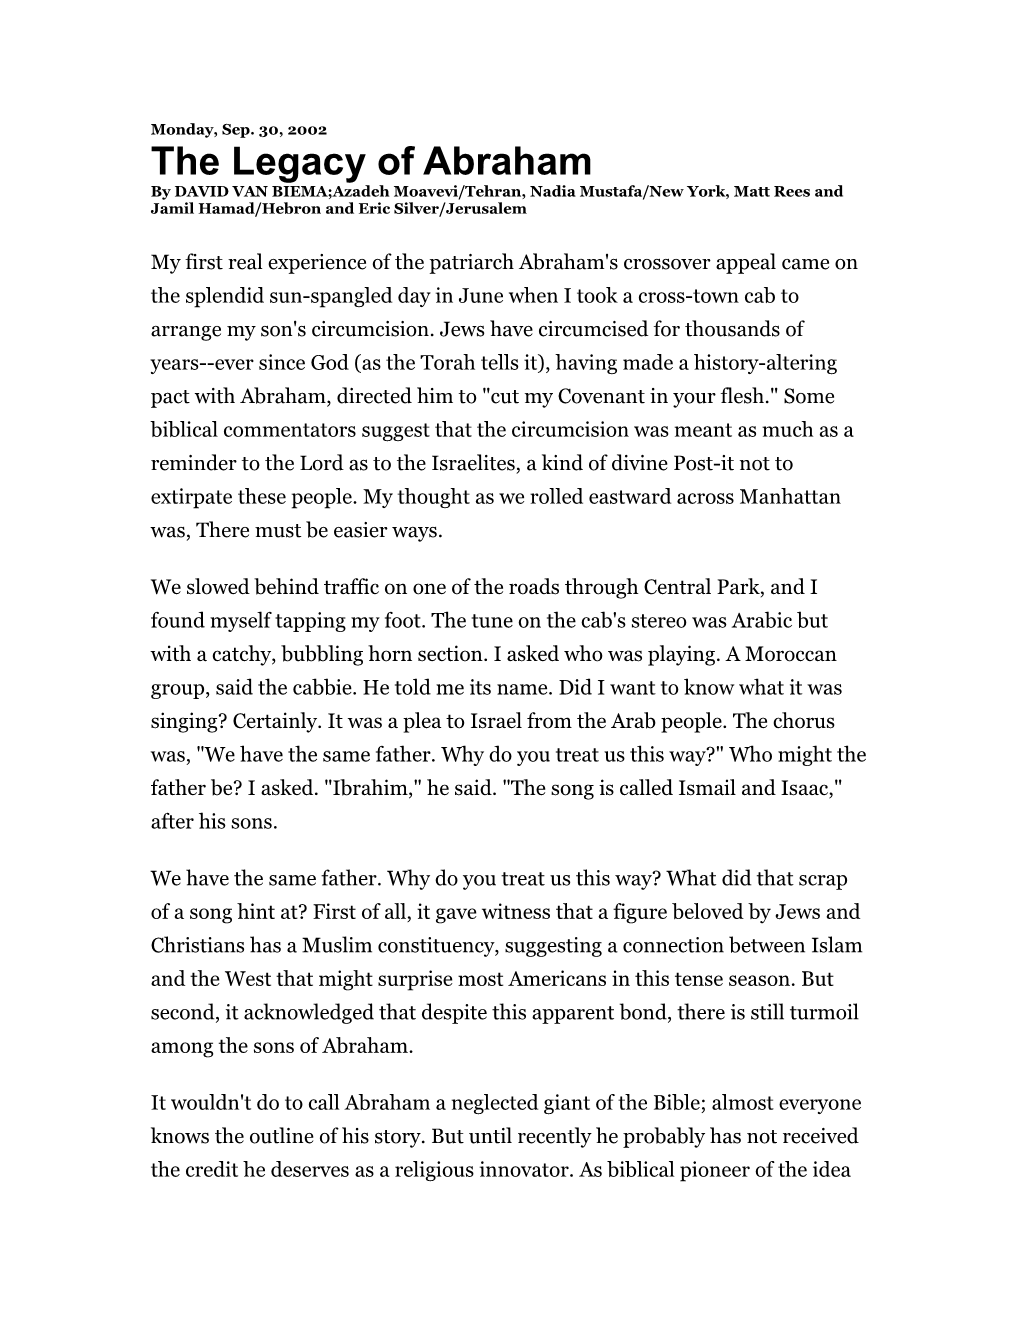 The Legacy of Abraham